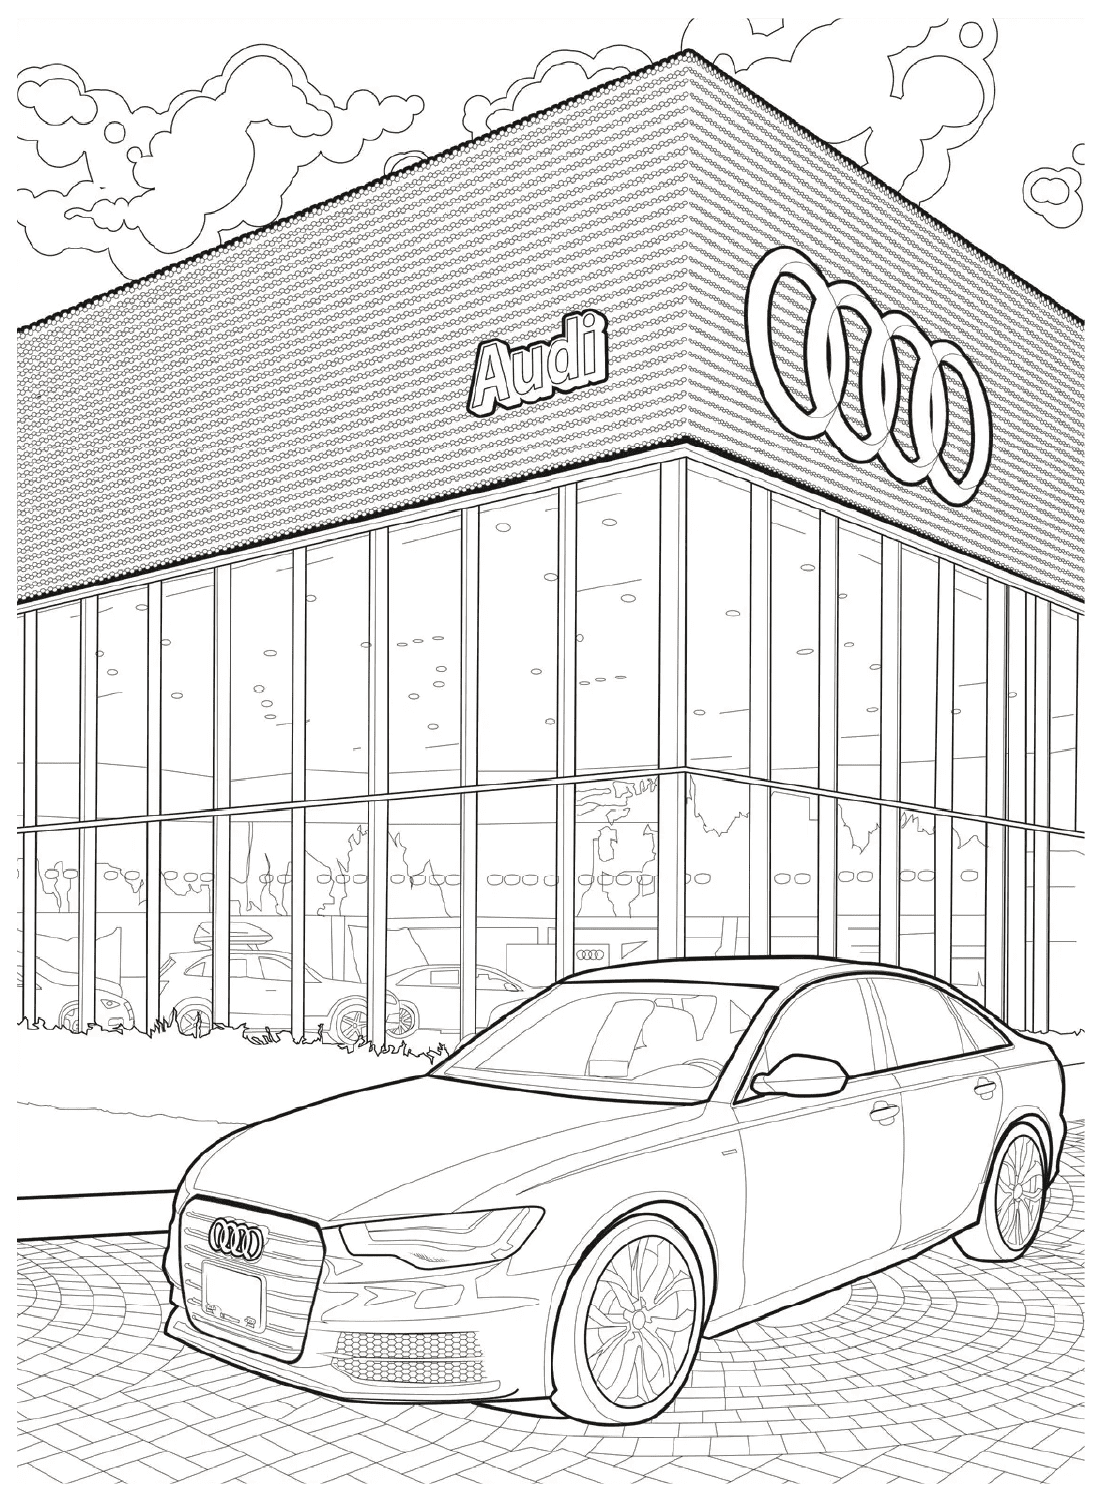 Printable Audi Cars Coloring Page from Audi